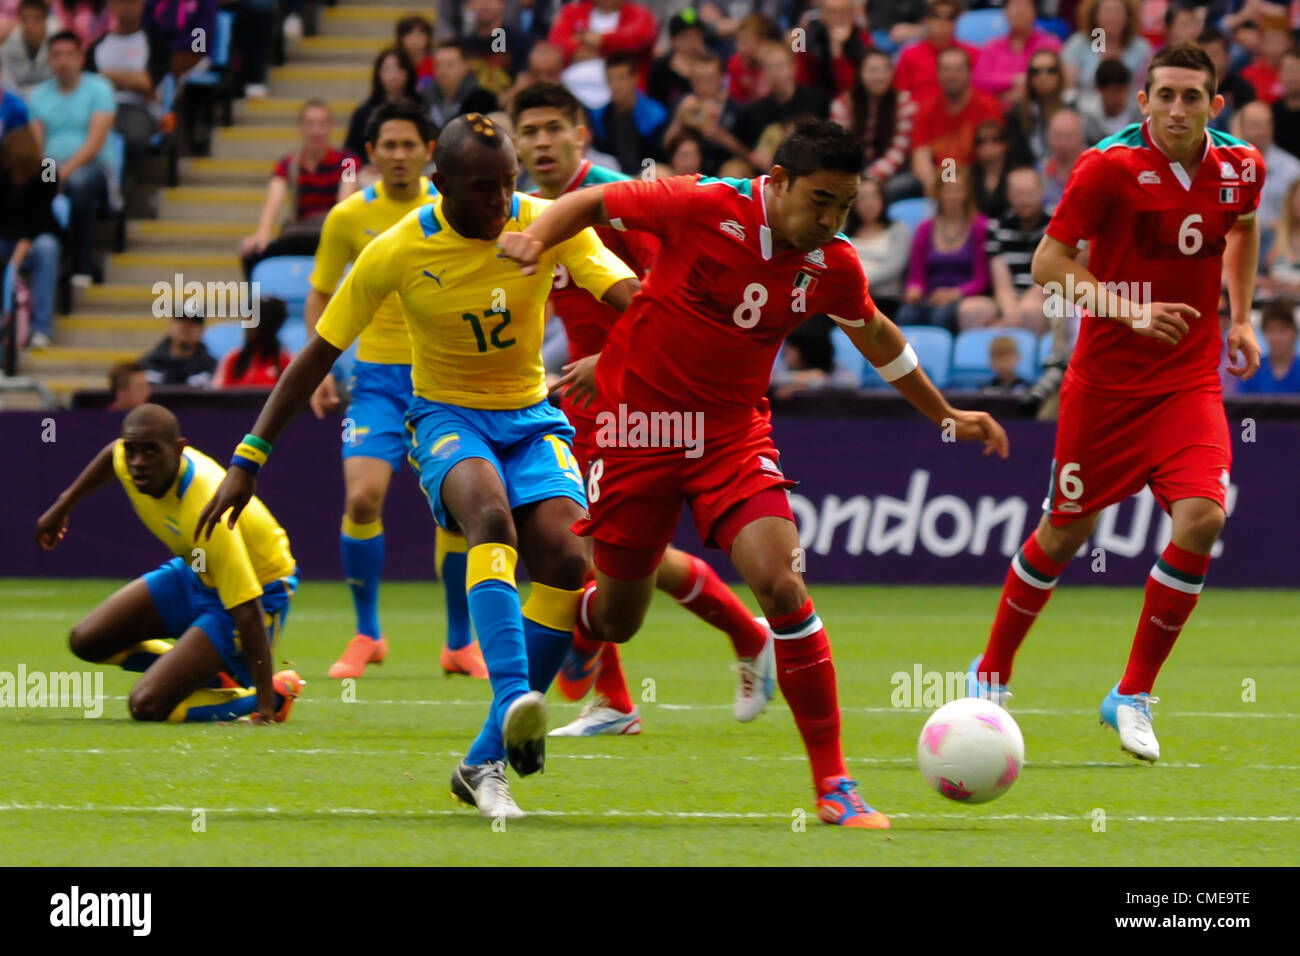 29.07.2012 Coventry, England. Marco FABIAN (Mexico) and Merlin TANDJIGORA (Gabon) in action during the Olympic Football Men's Preliminary game between Mexico and Gabon from the City of Coventry Stadium Stock Photo